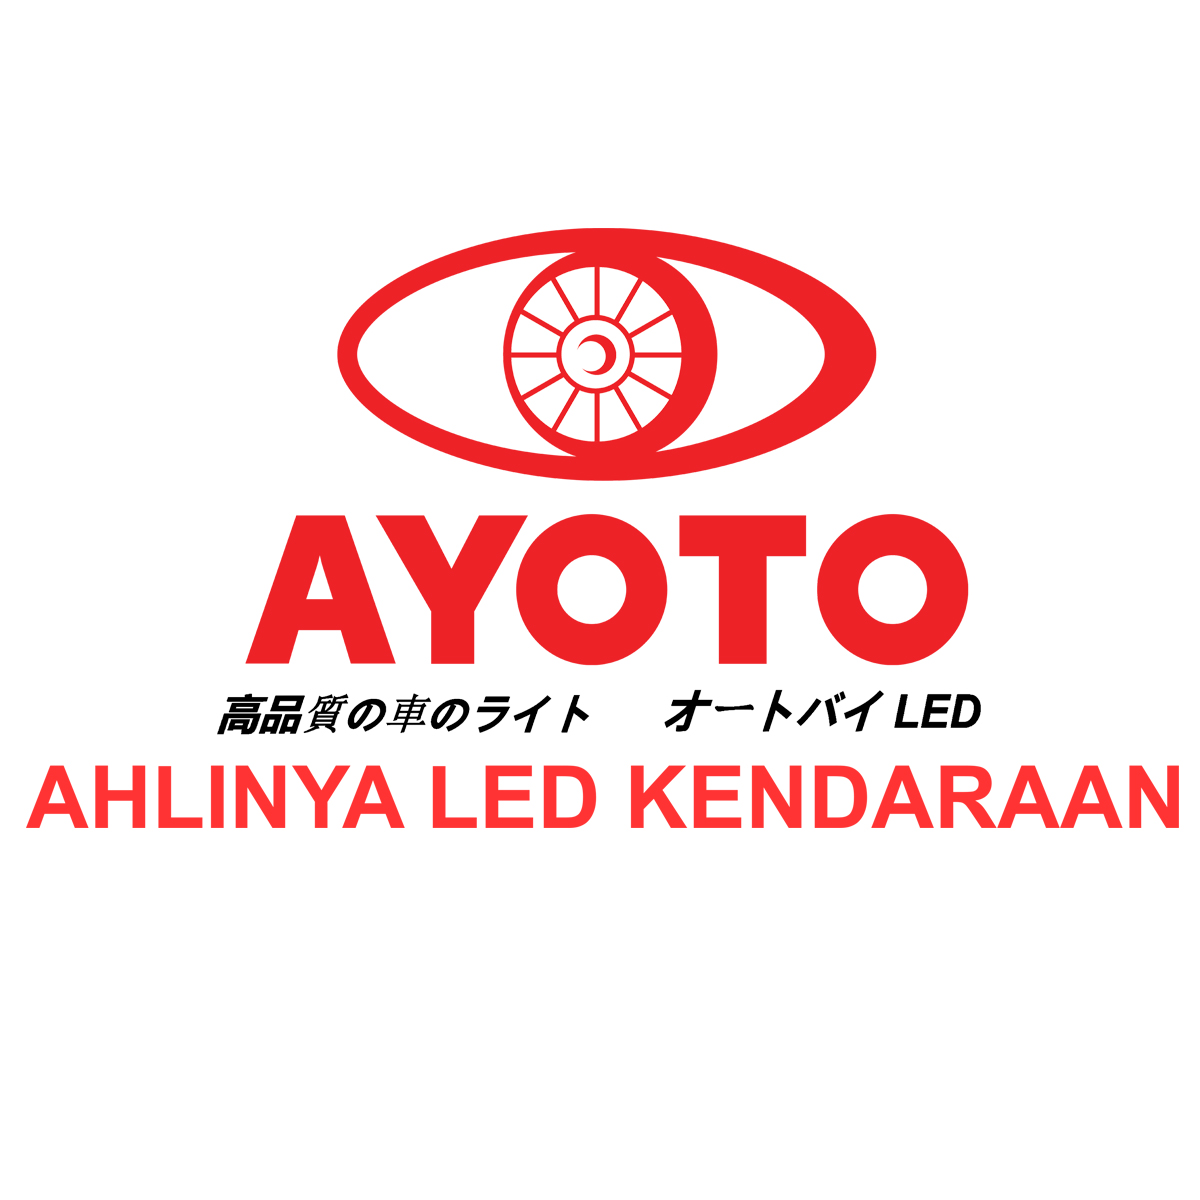 Ayoto Official Store